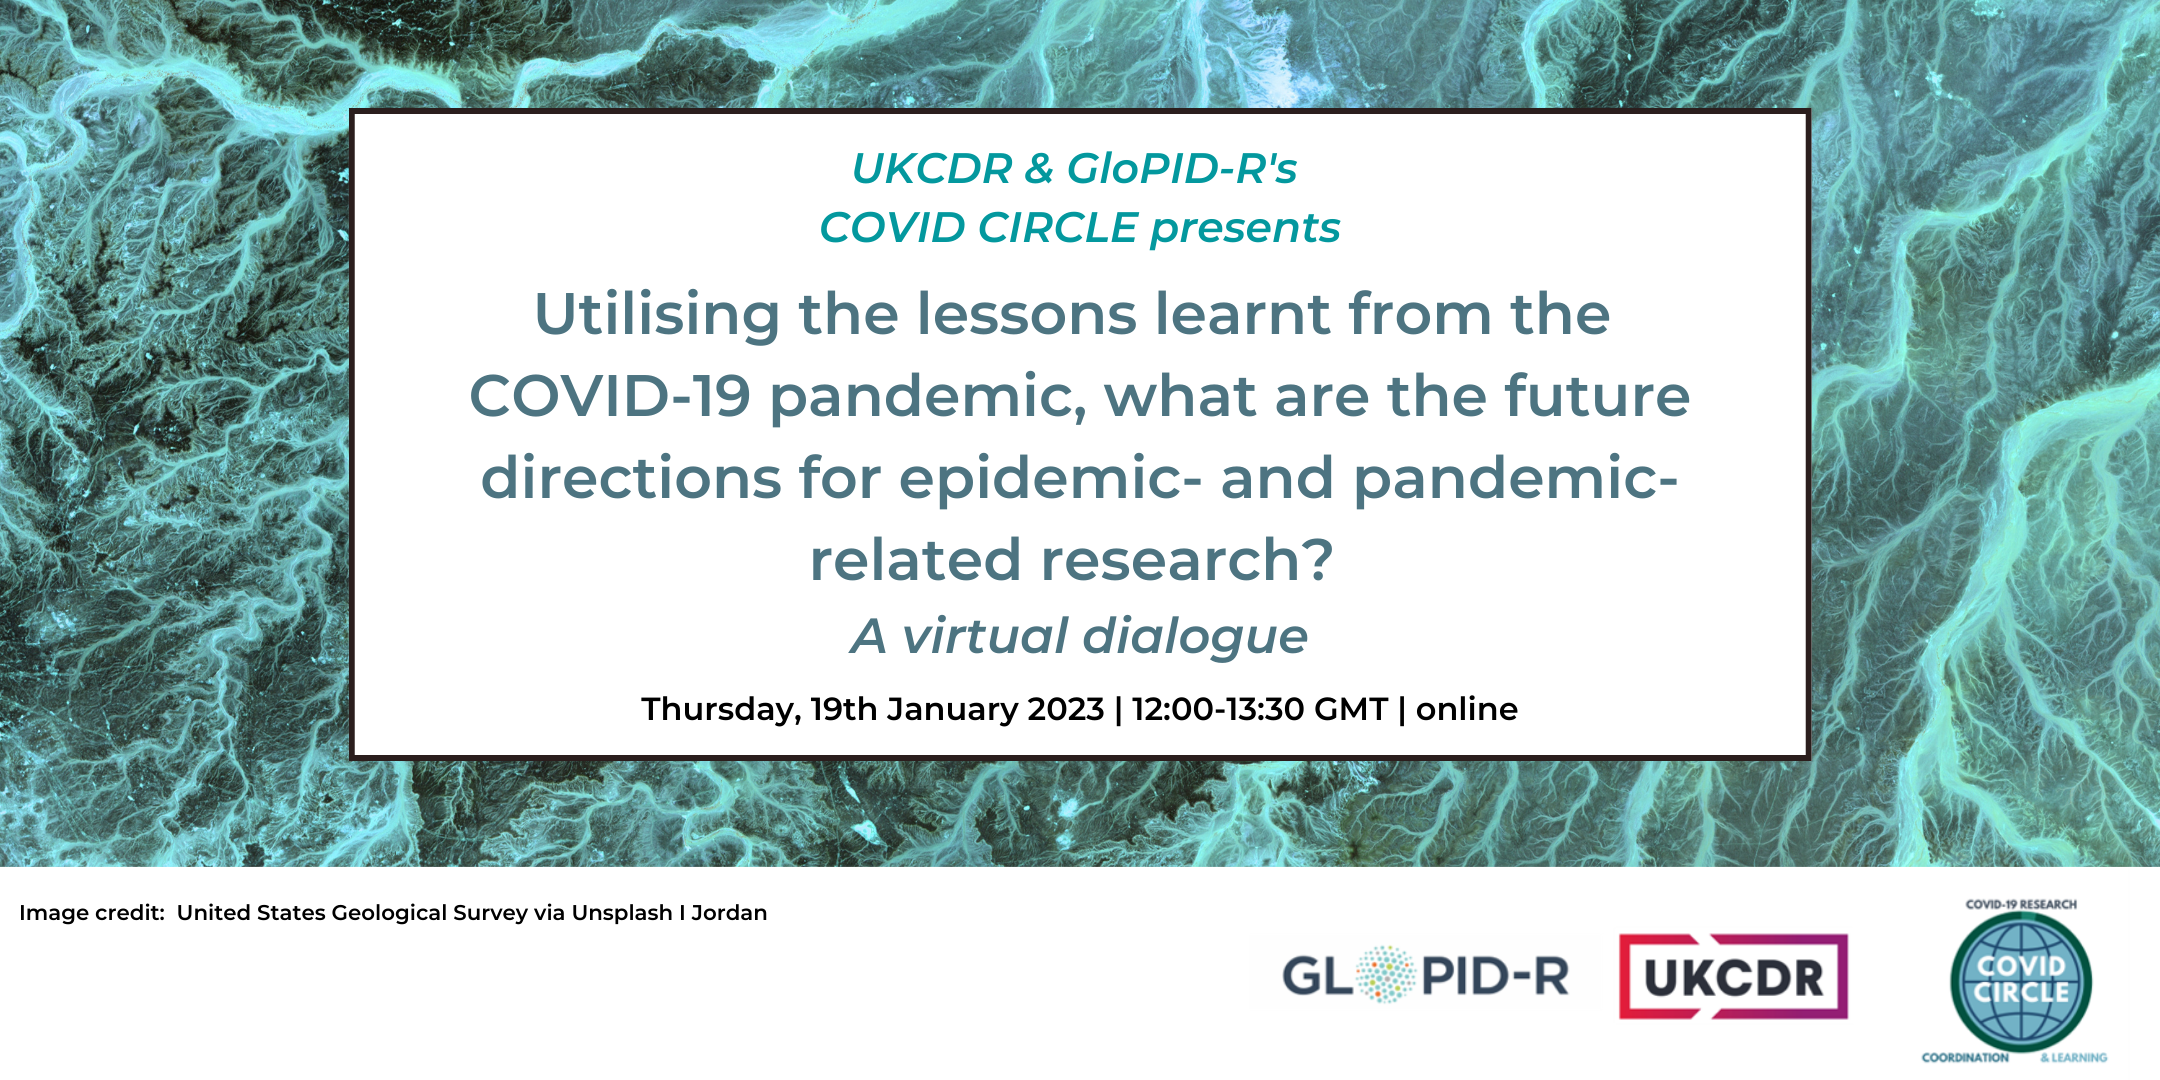 Utilising the lessons learnt from the COVID-19 pandemic, what are the future directions for epidemic- and pandemic-related research?